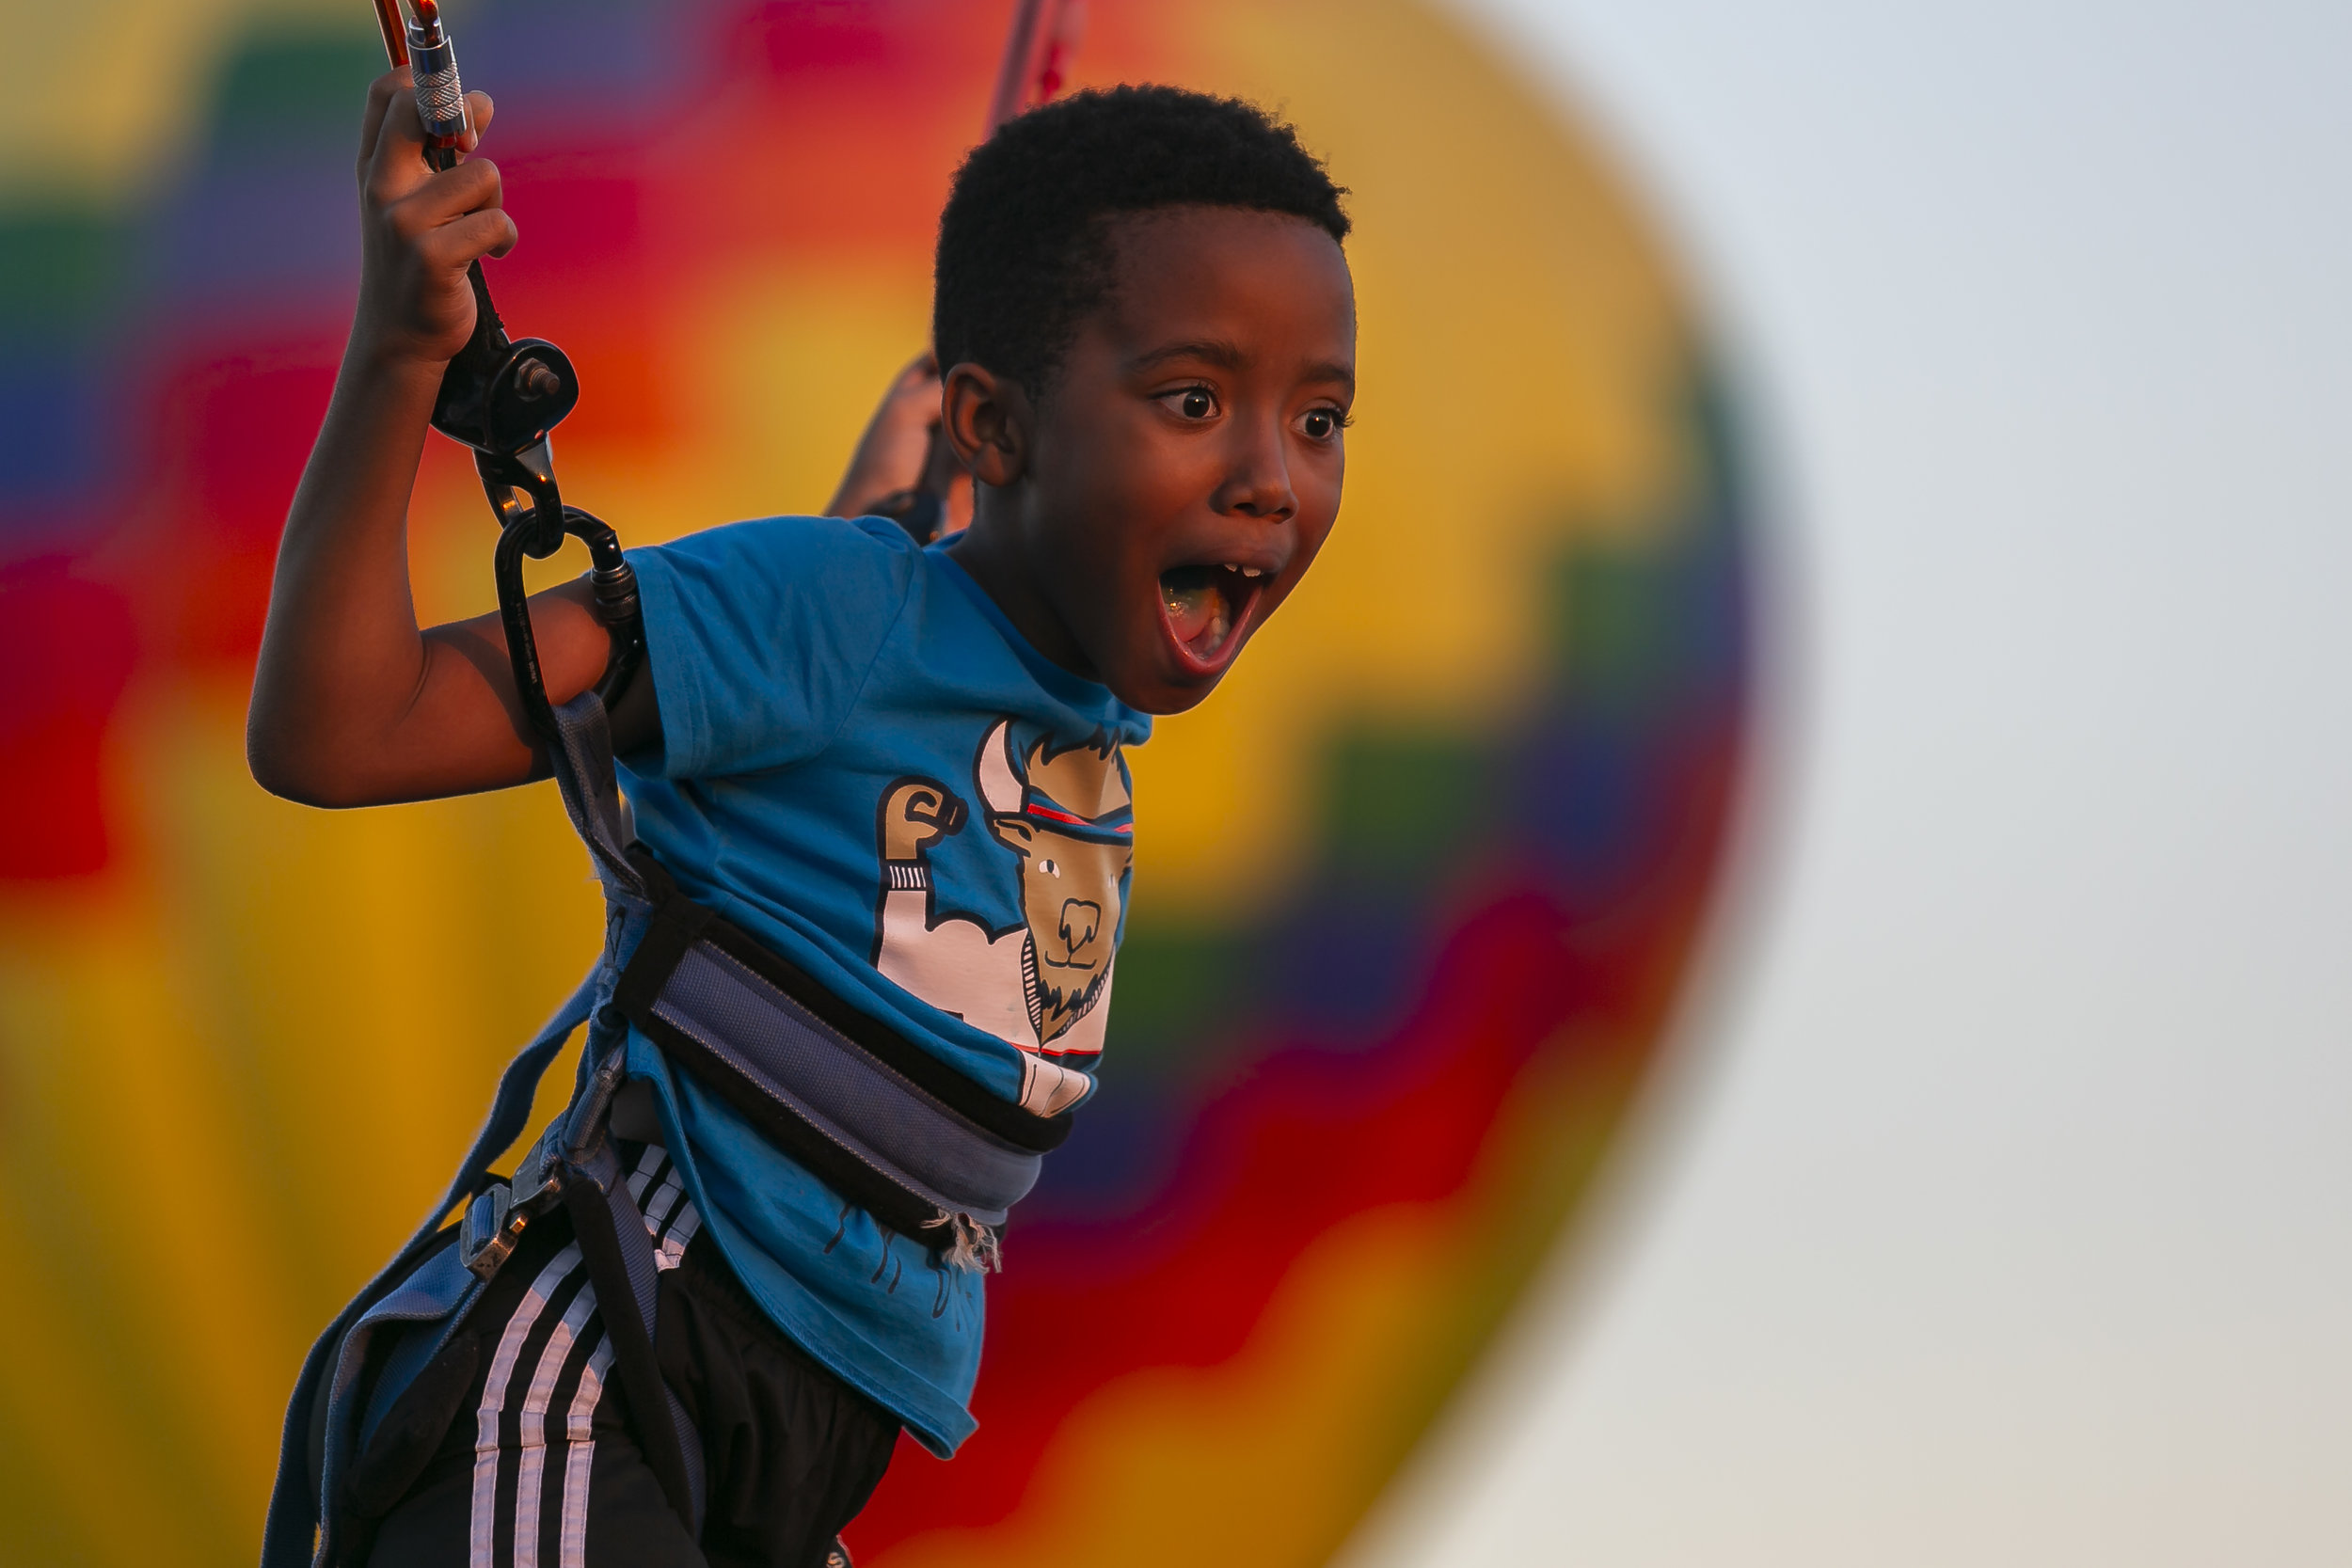  Dax, 9, reacts while riding a bungee trampoline during the Homestead Miami Balloon Glow on March 2, 2019, near the Homestead-Miami Speedway in Homestead, Florida. 